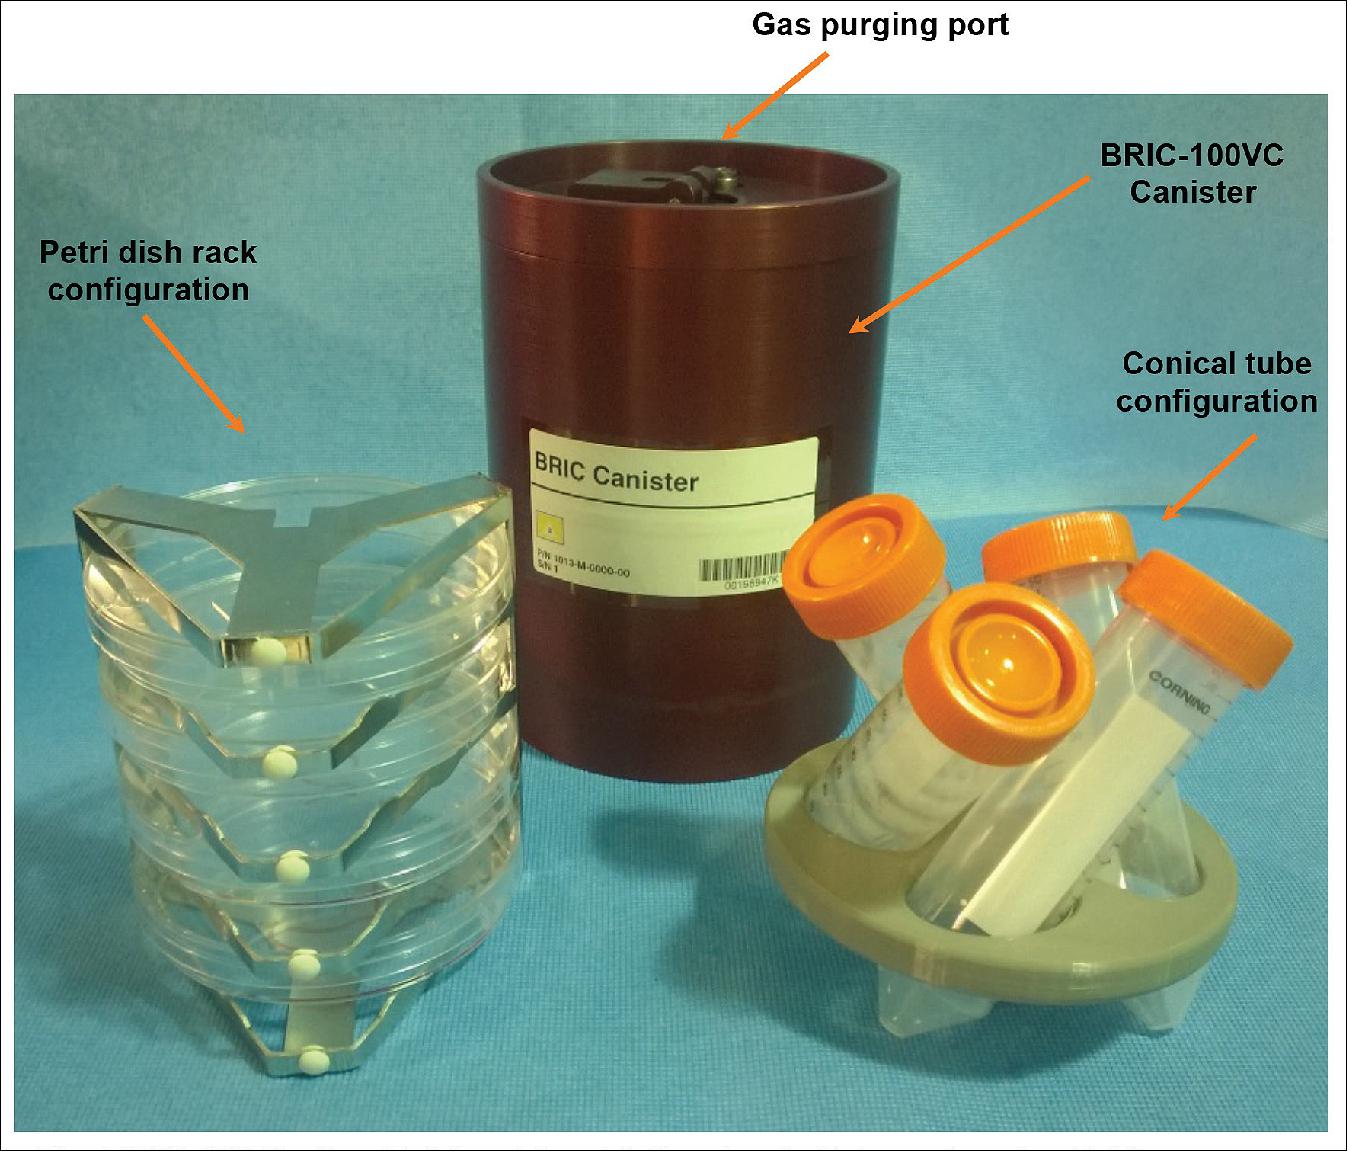 Figure 88: The BRIC system will be used by the selected proposals. This image shows a BRIC-100VC with petri dish rack insert (left) and conical tube configuration (right), image credit: NASA